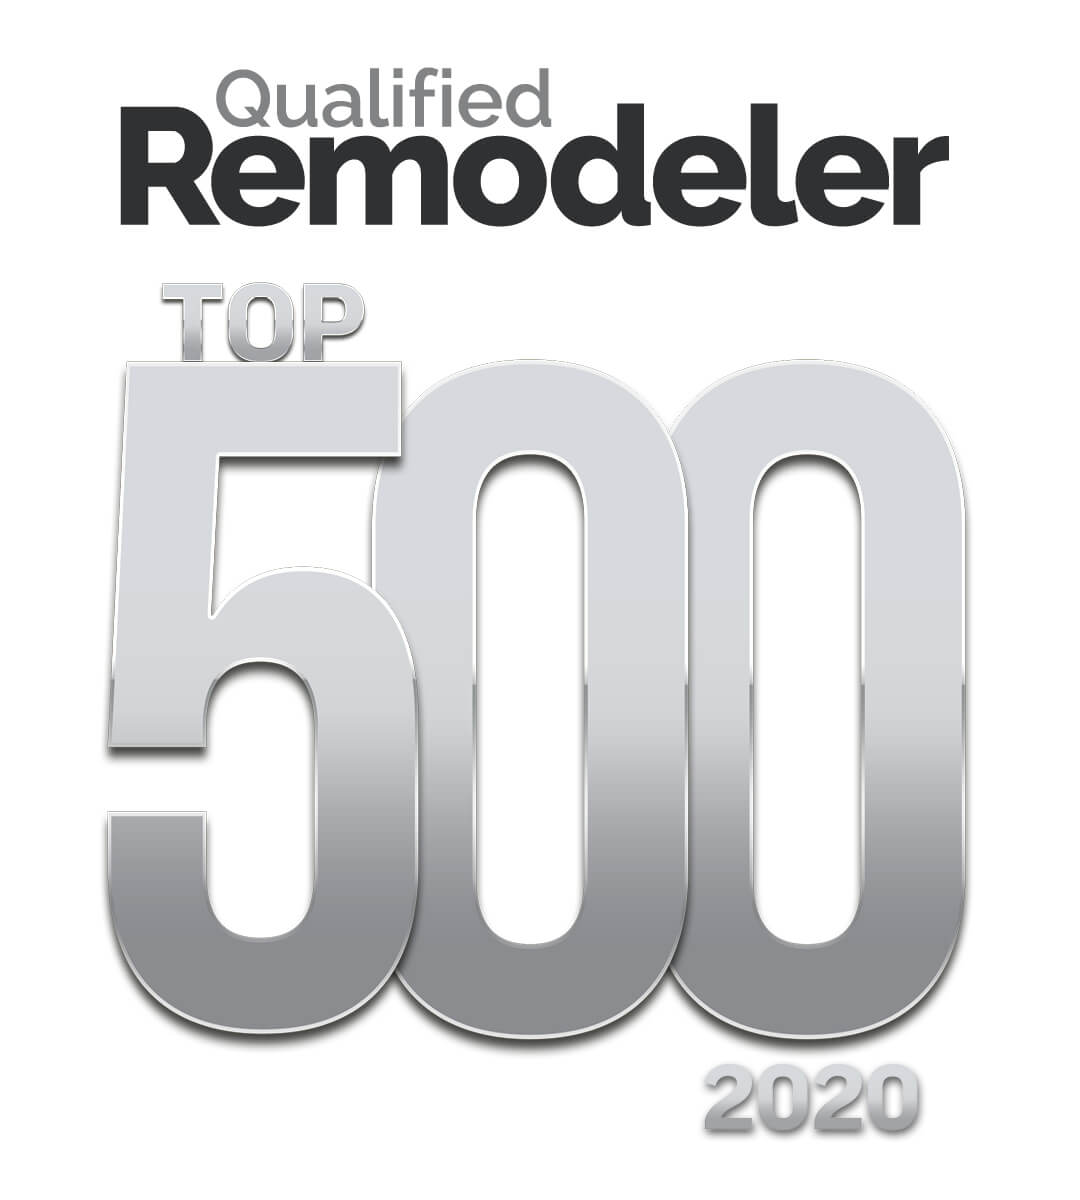 Qualified Remodeler’s Top 500 List 2020